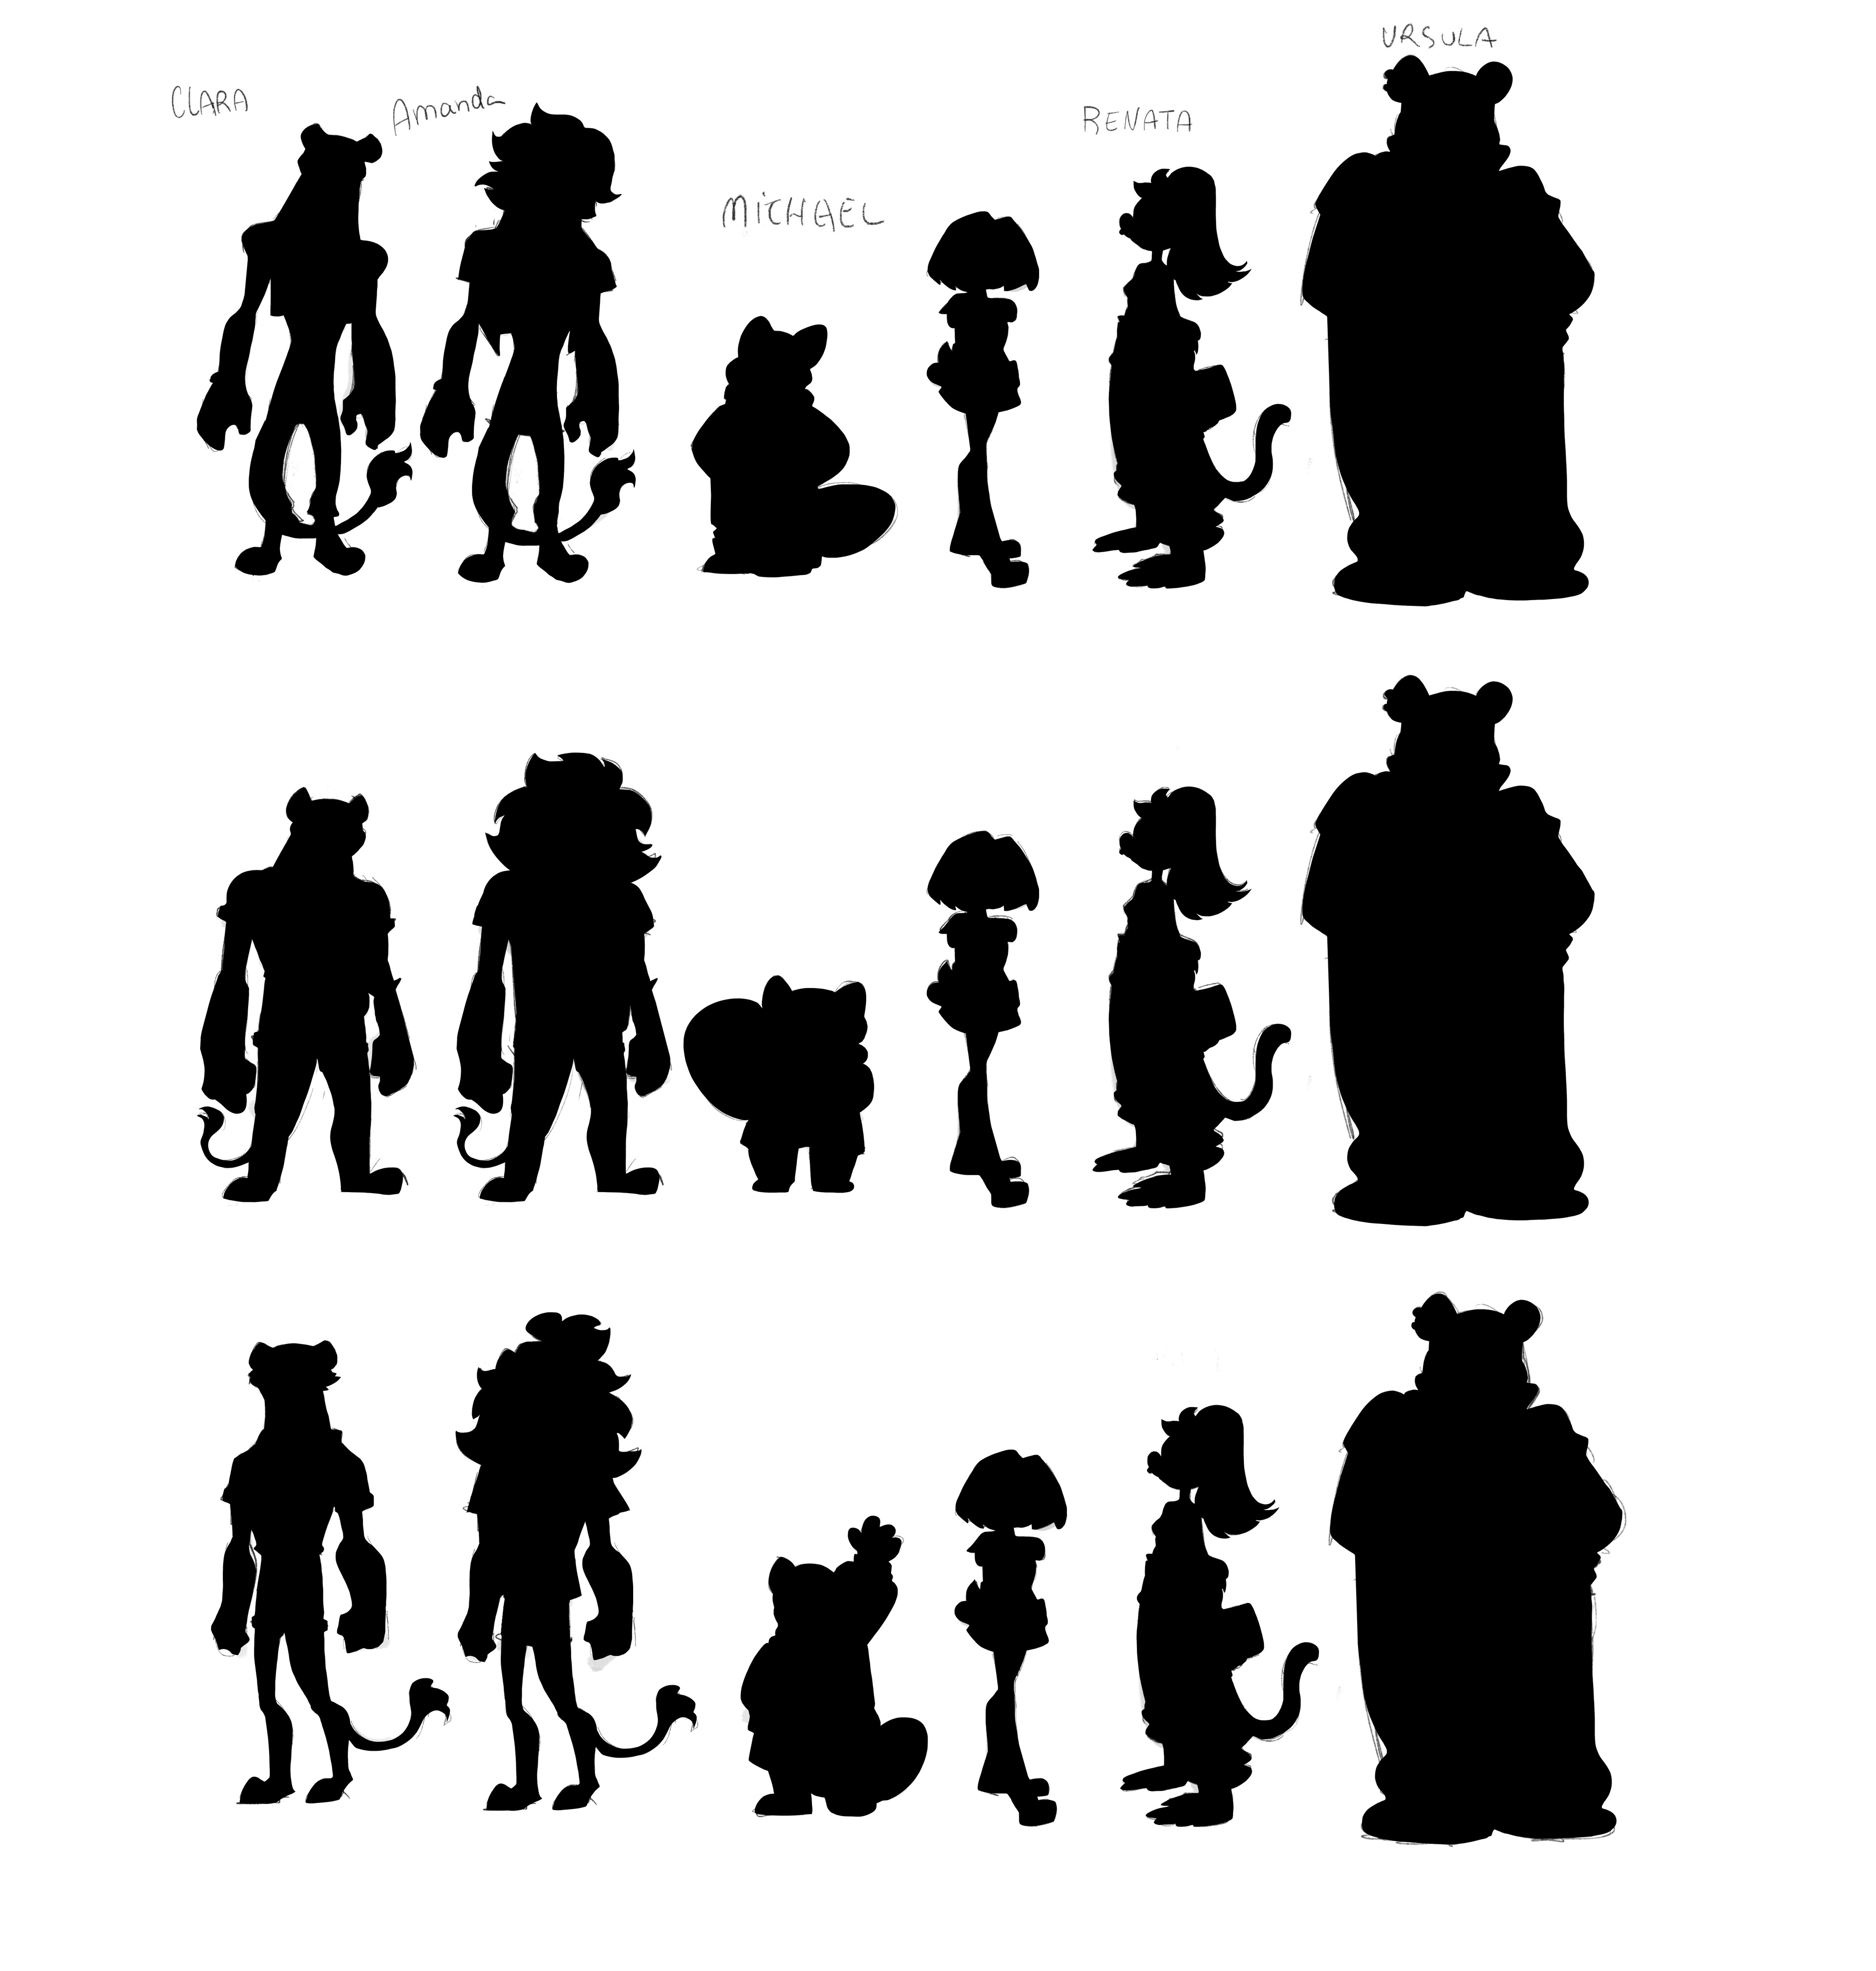 I was unsure about the twins and the Red Panda design so checking the silhouettes is essential for me.